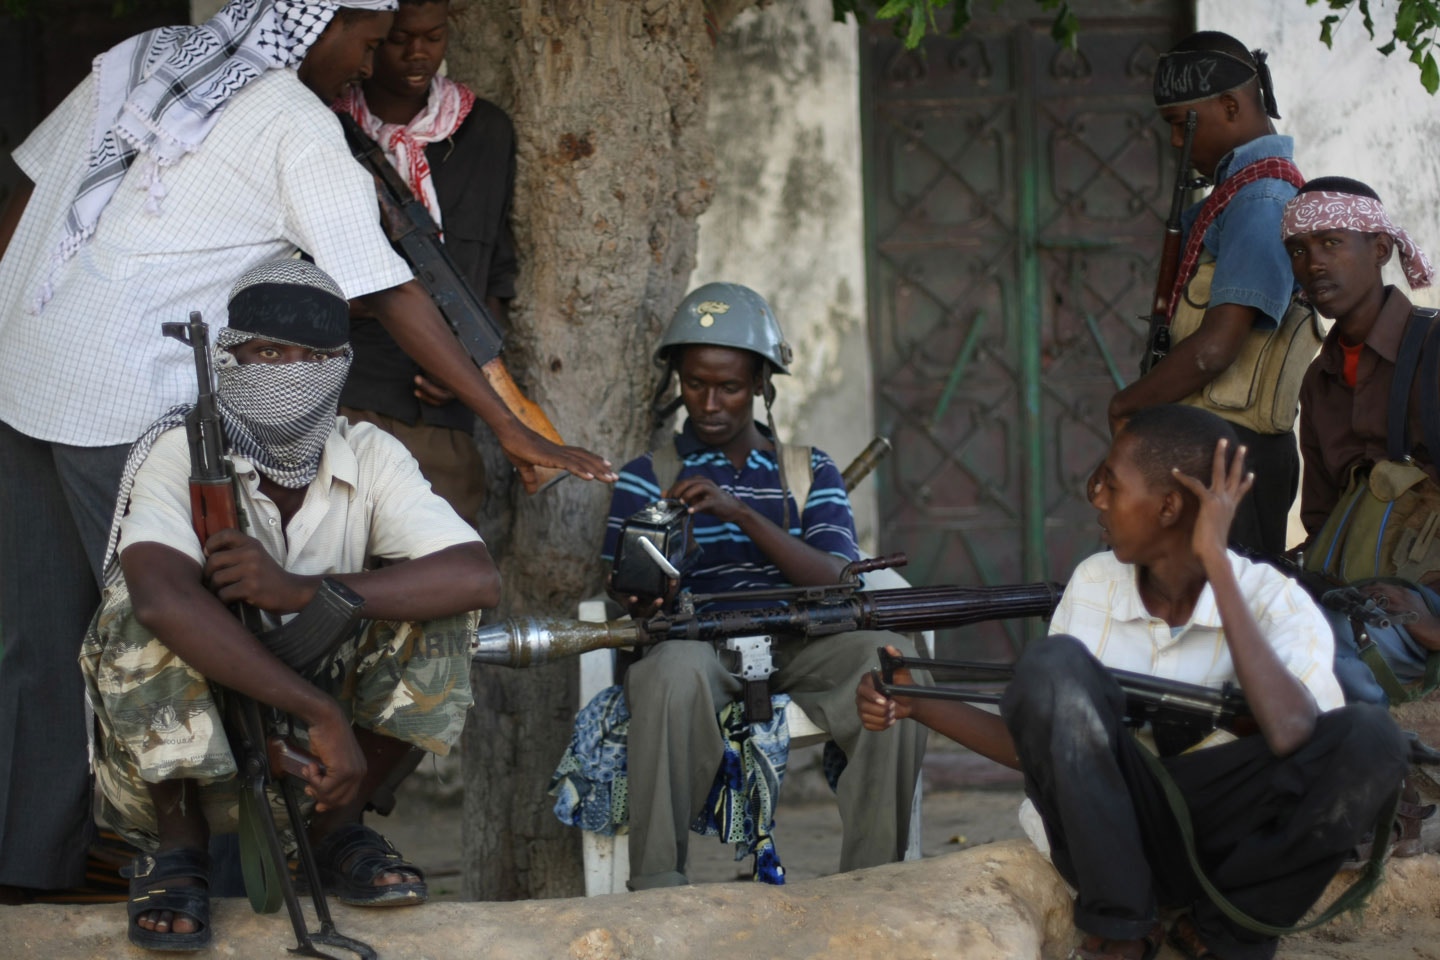 Al-Shabab and Hizbul Islam militants take a break at a front-line section in sanca district in Mogadishu,  on July 21, 2009. Somalia's hard line Shabab militia yesterday raided the offices of three UN organisations hours after they banned their operations on accusation that they were "enemies of Islam and Muslims. The armed group stormed the United Nations Development Programme, UN Department of Safety and Security and the UN Political Office for Somalia in two southern Somalia towns and impounded office equipment. The above foreign agencies have been found to be working against the benefit of the Somali Muslim population and against the establishment of an Islamic state in Somalia," the Shebab said in a statement. AFP PHOTO/ MOHAMED DAHIR        (Photo credit should read MOHAMED DAHIR/AFP/GettyImages)